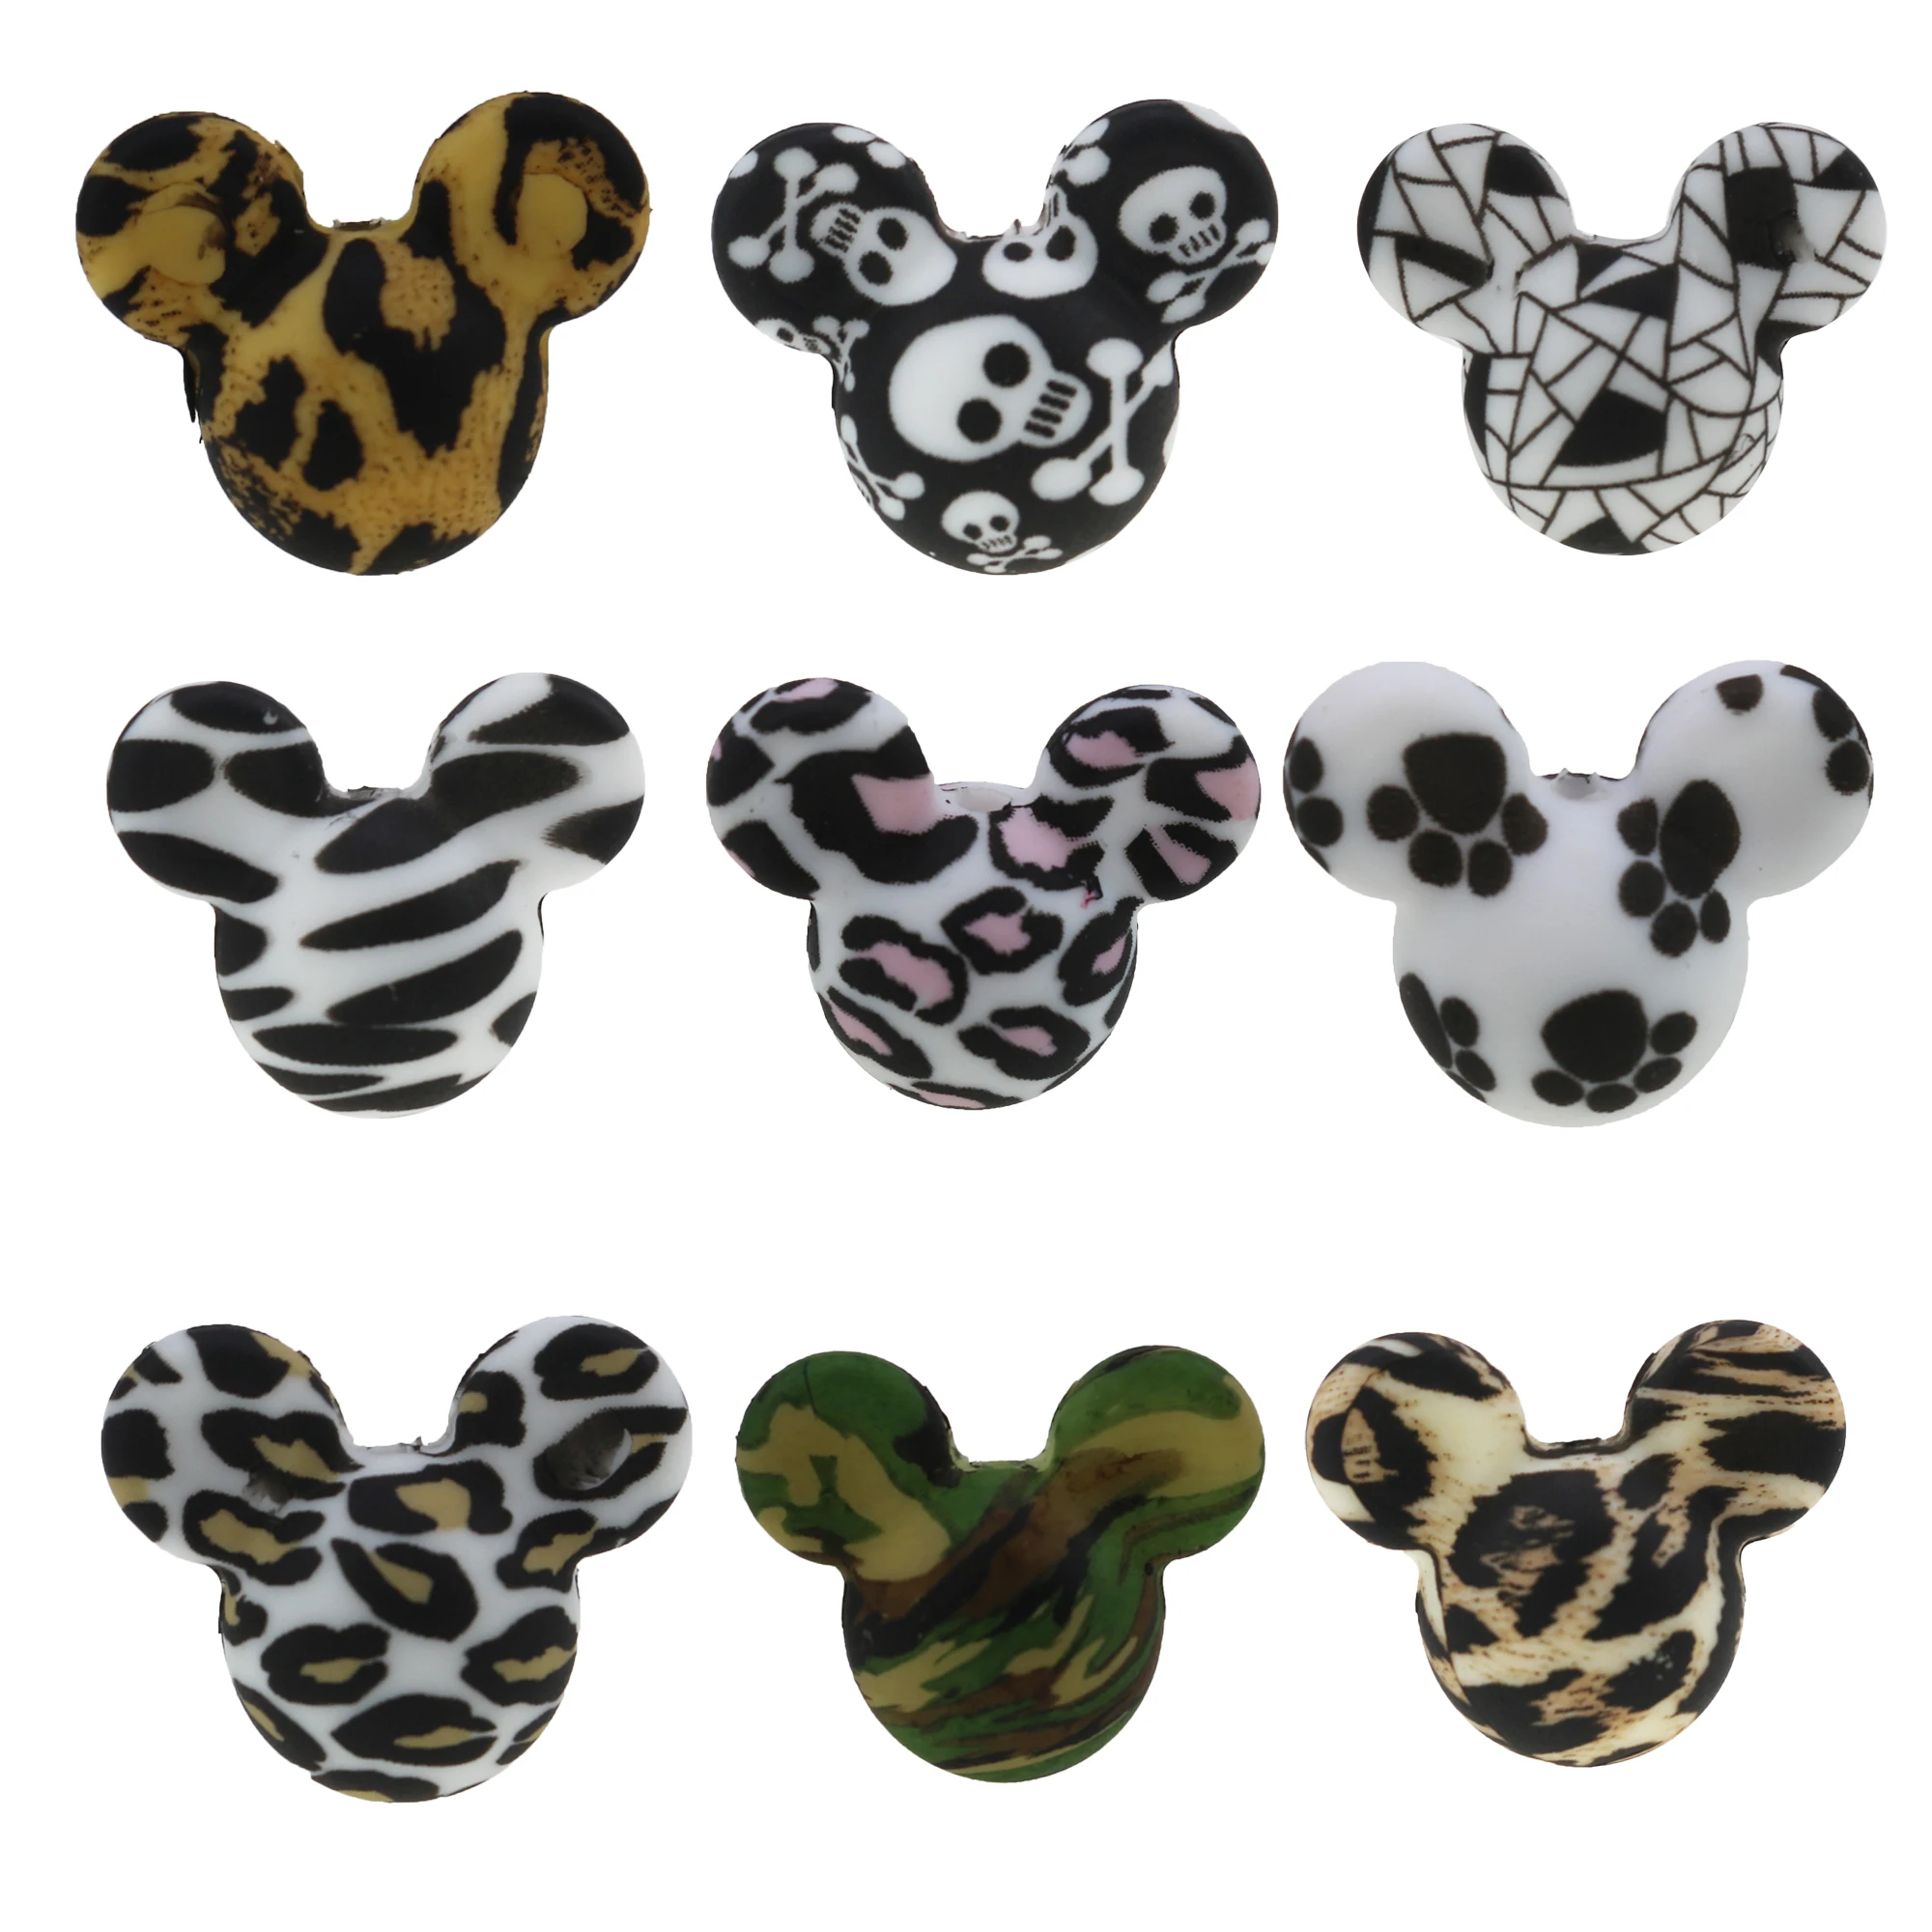 

BPA FREE rainbow silicone teething beads toys food grade BABY Mickey mouse head chew beads leopard silicone bead patterned, 33 colors, customed